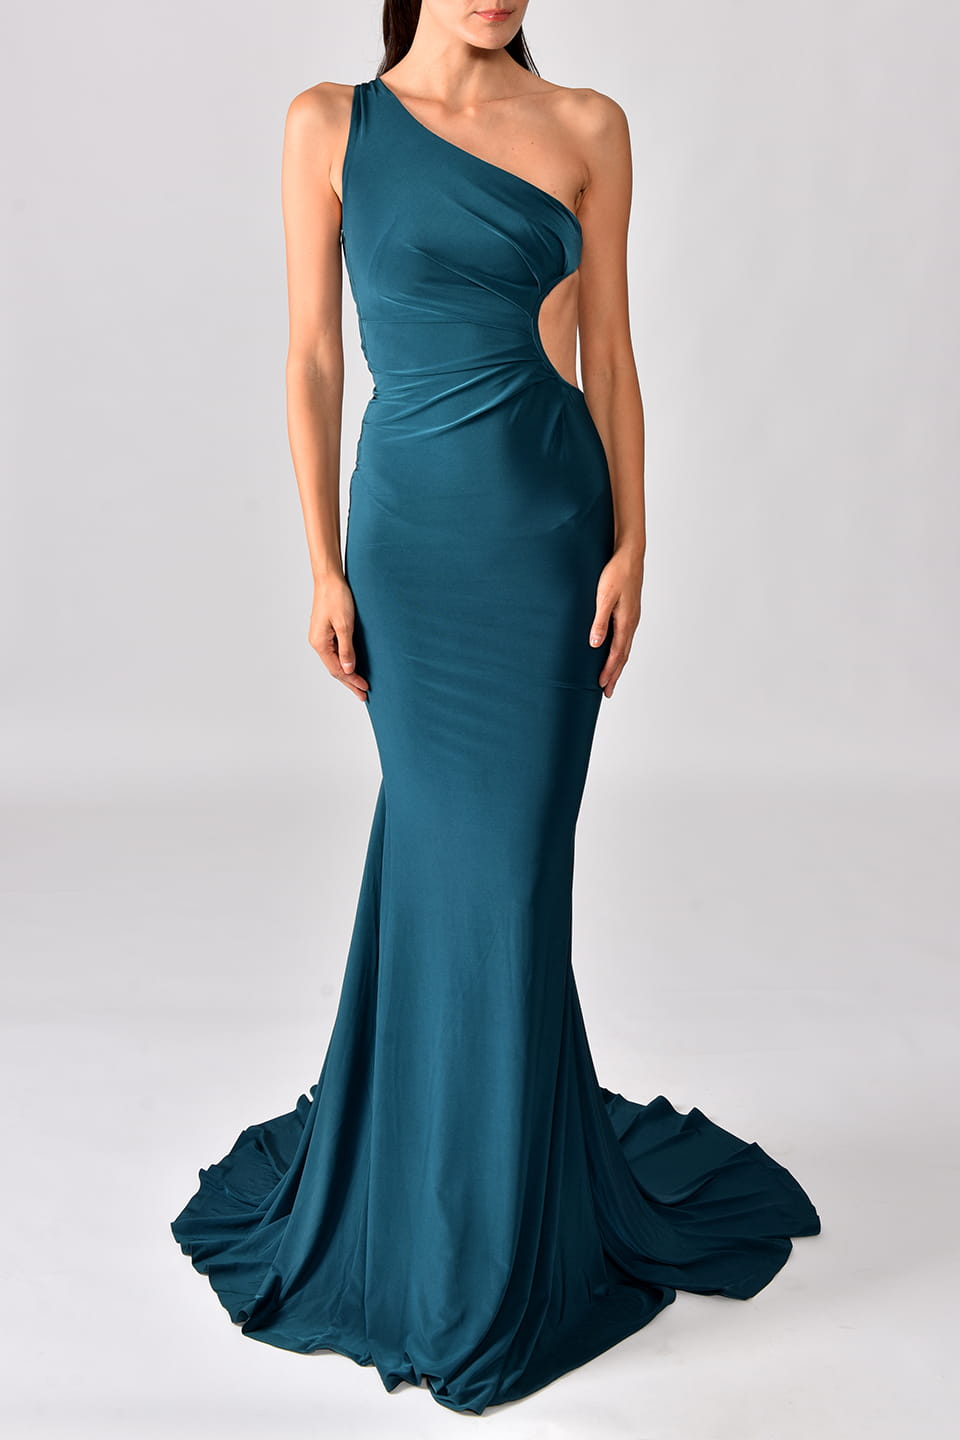 Thumbnail for Product gallery 1, Model wears Special occasion Maxi dress in Petrol Blue color from Hamel fashion stylist, posing for front view